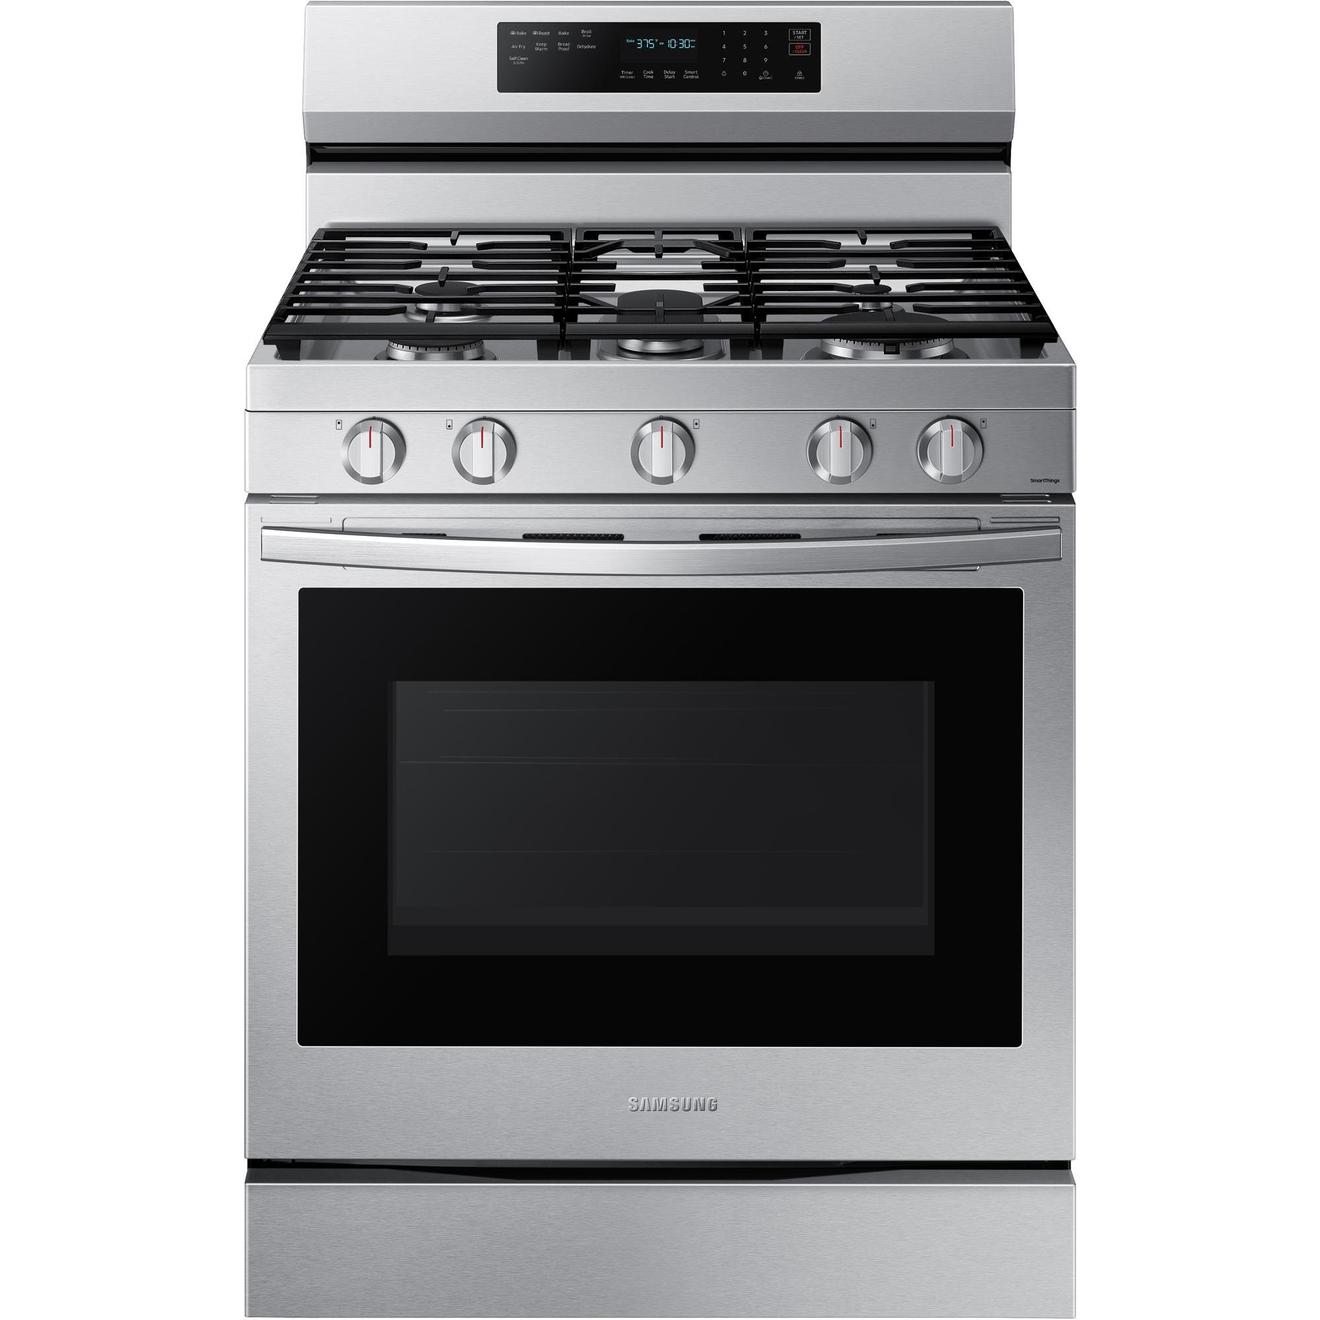 Samsung 30 inch Single Oven Gas Range offers at $1299.98 in Trail Appliances